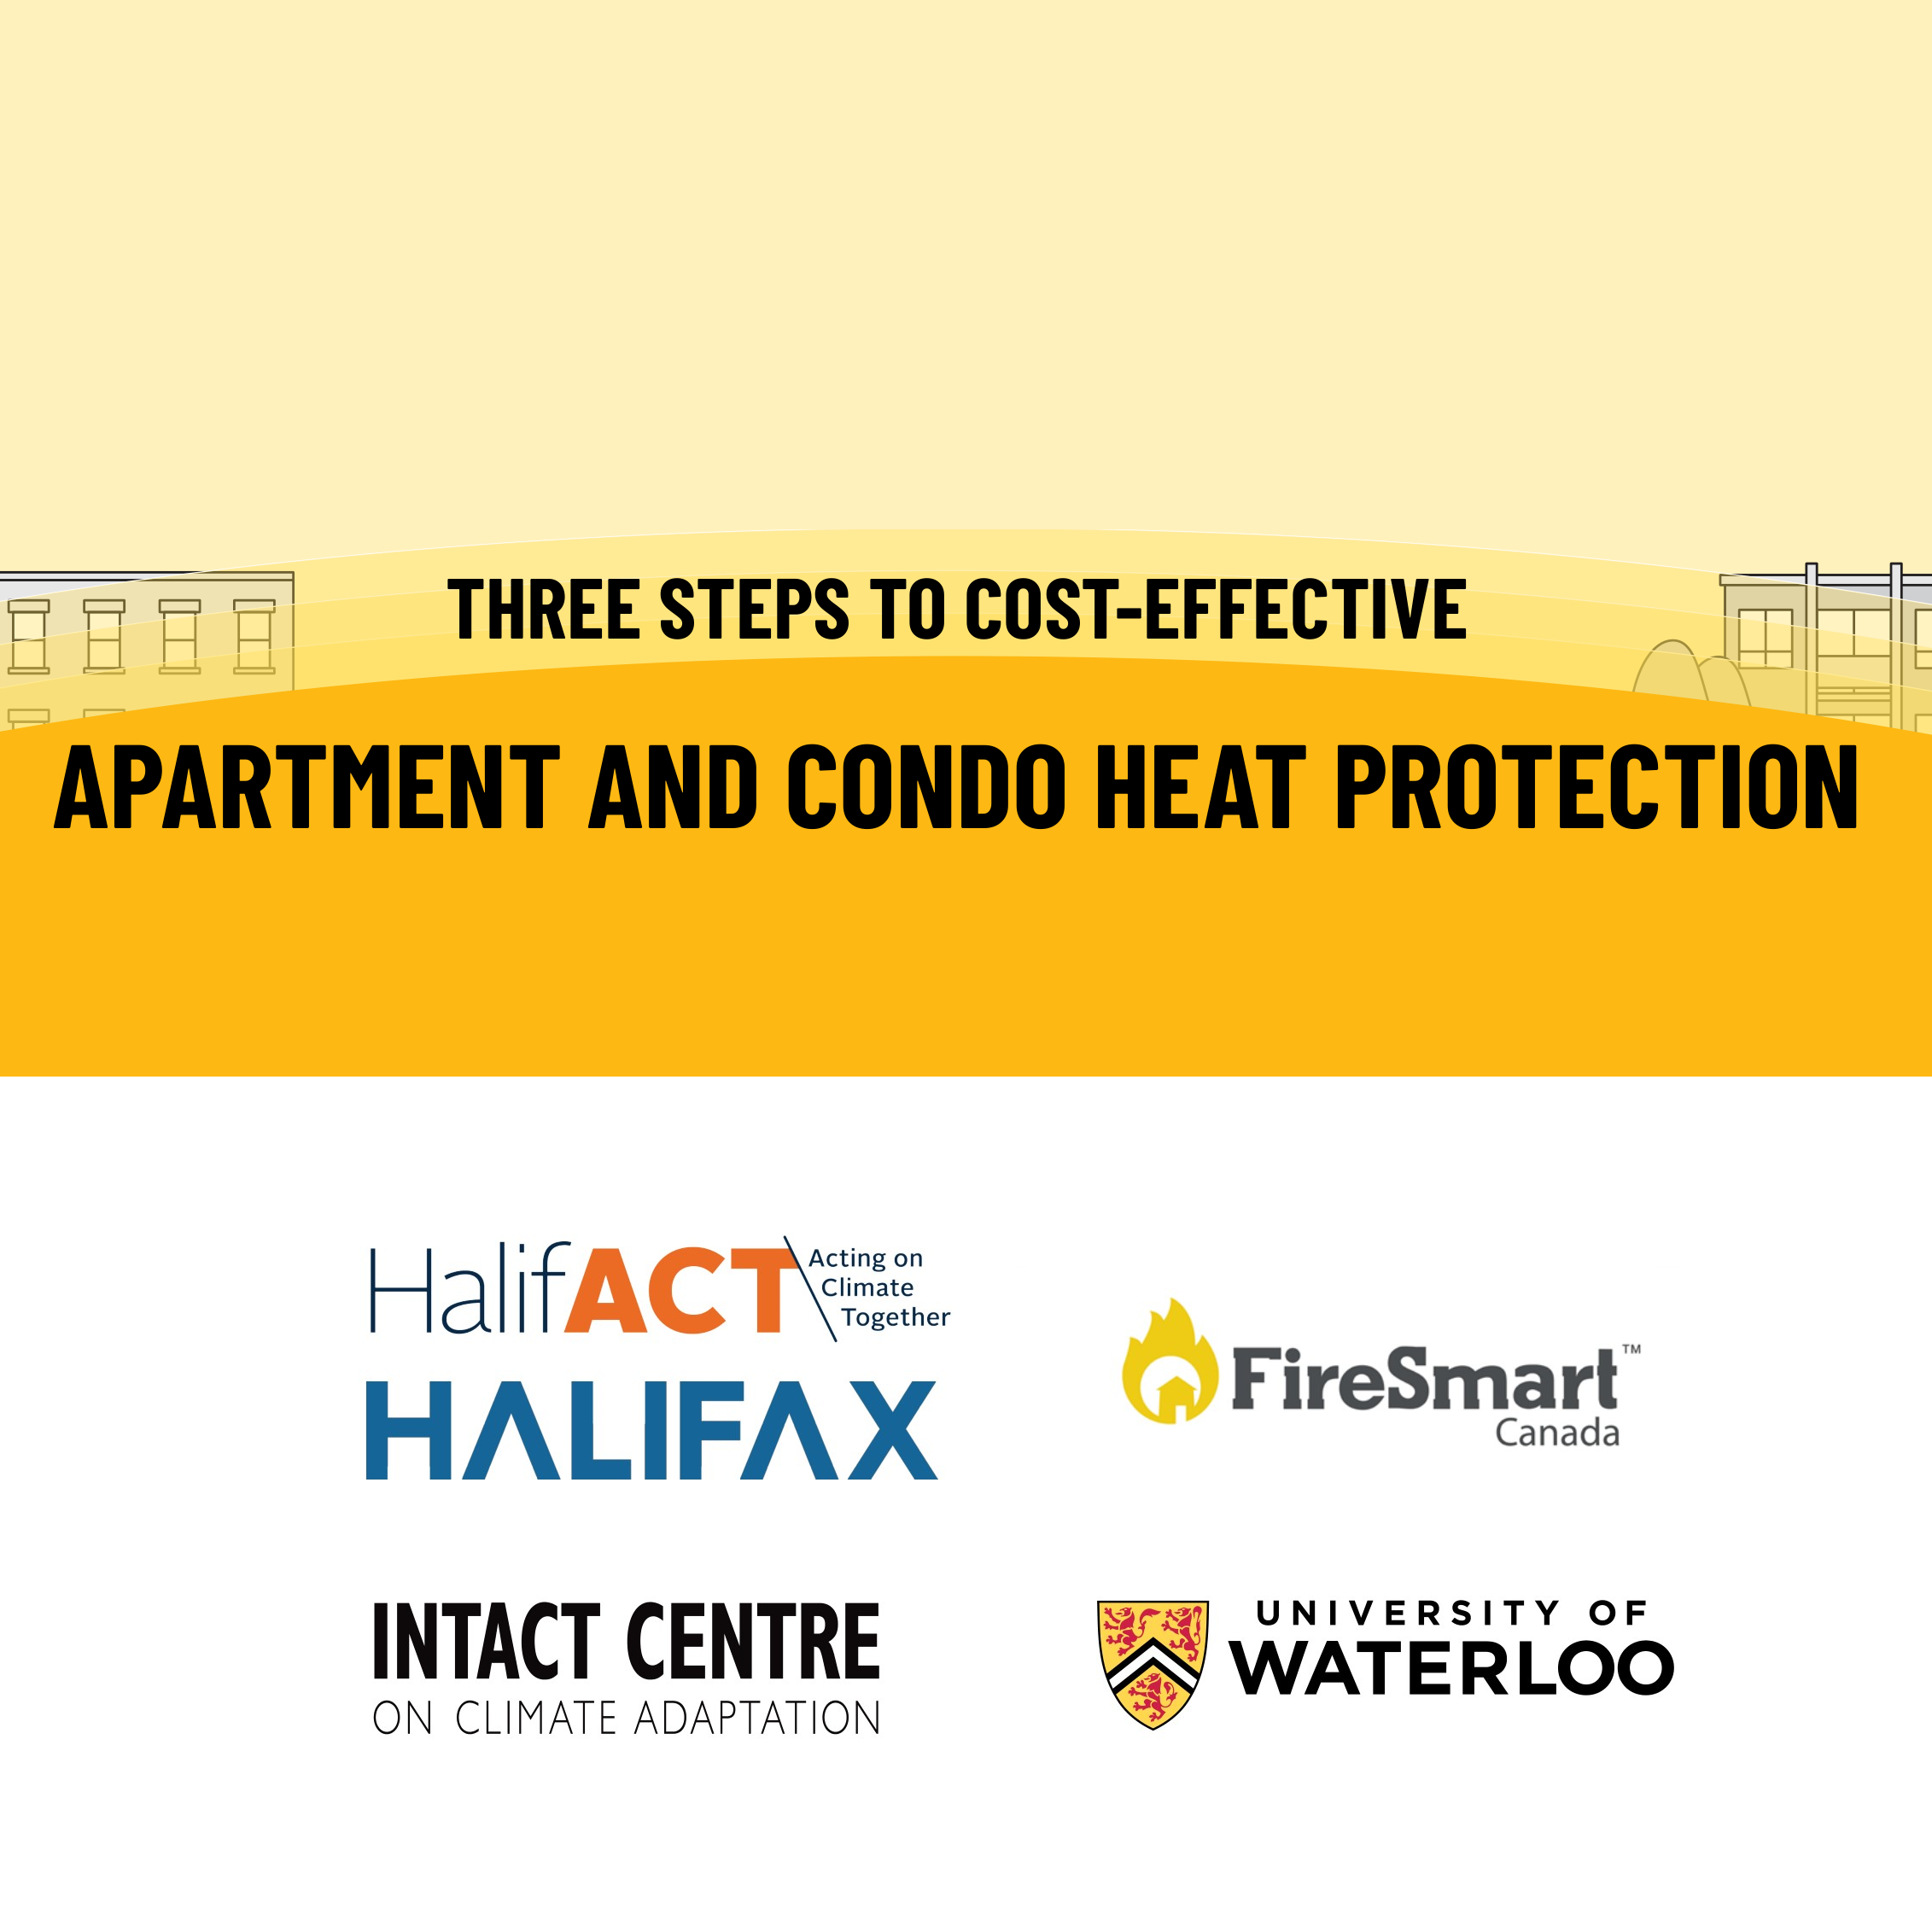 Three Steps to Cost-Effective Apartment and Condo Heat Protection graphic